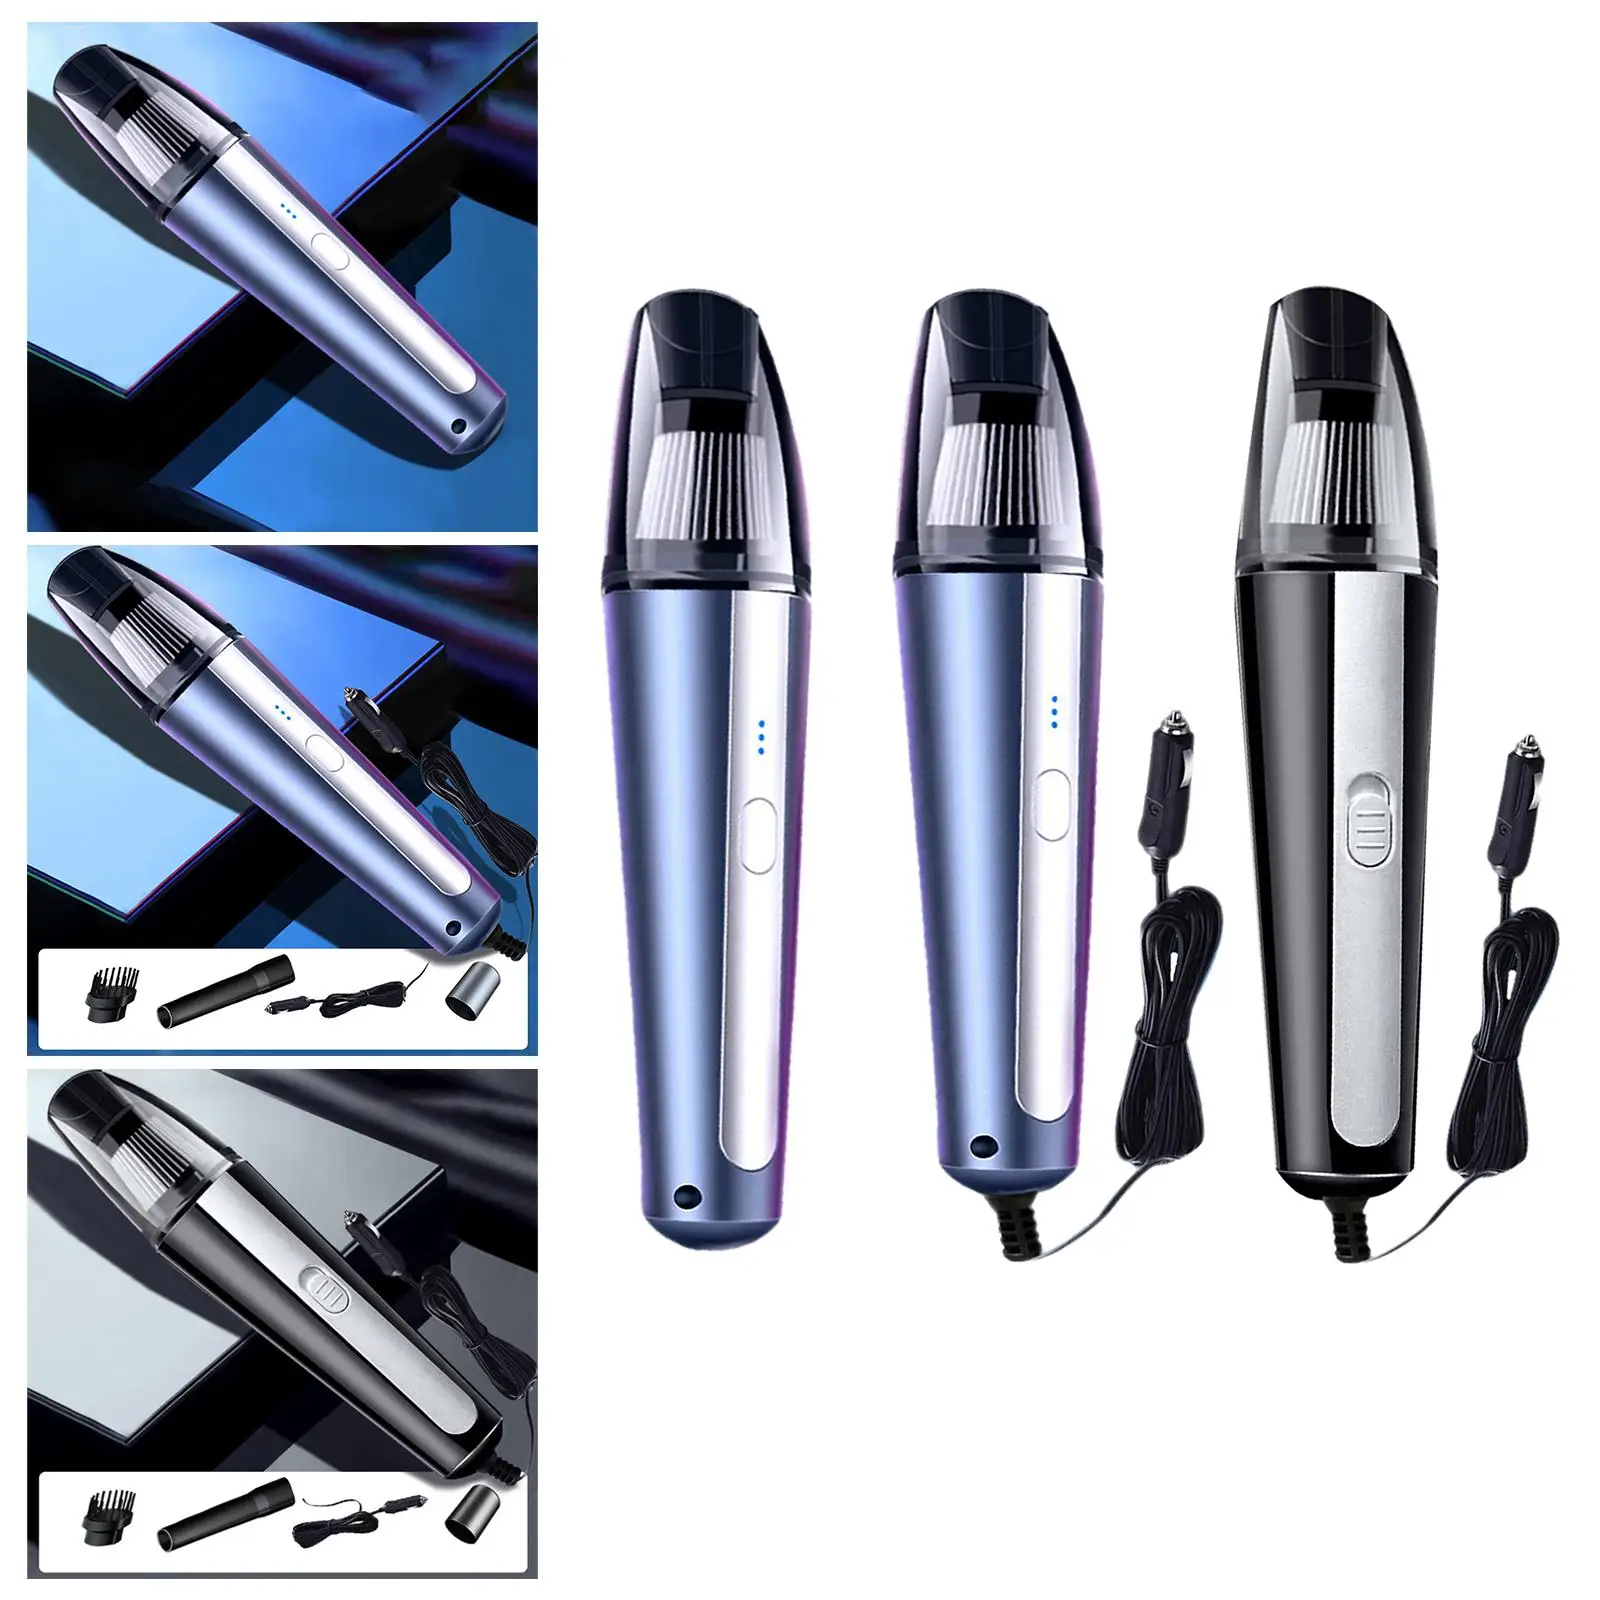 Handheld Cars Vacuum Cleaner 6000PA and Wet Use Removable Portable Cyclone Suction for , Seats ,Chairs ,Household Supplies